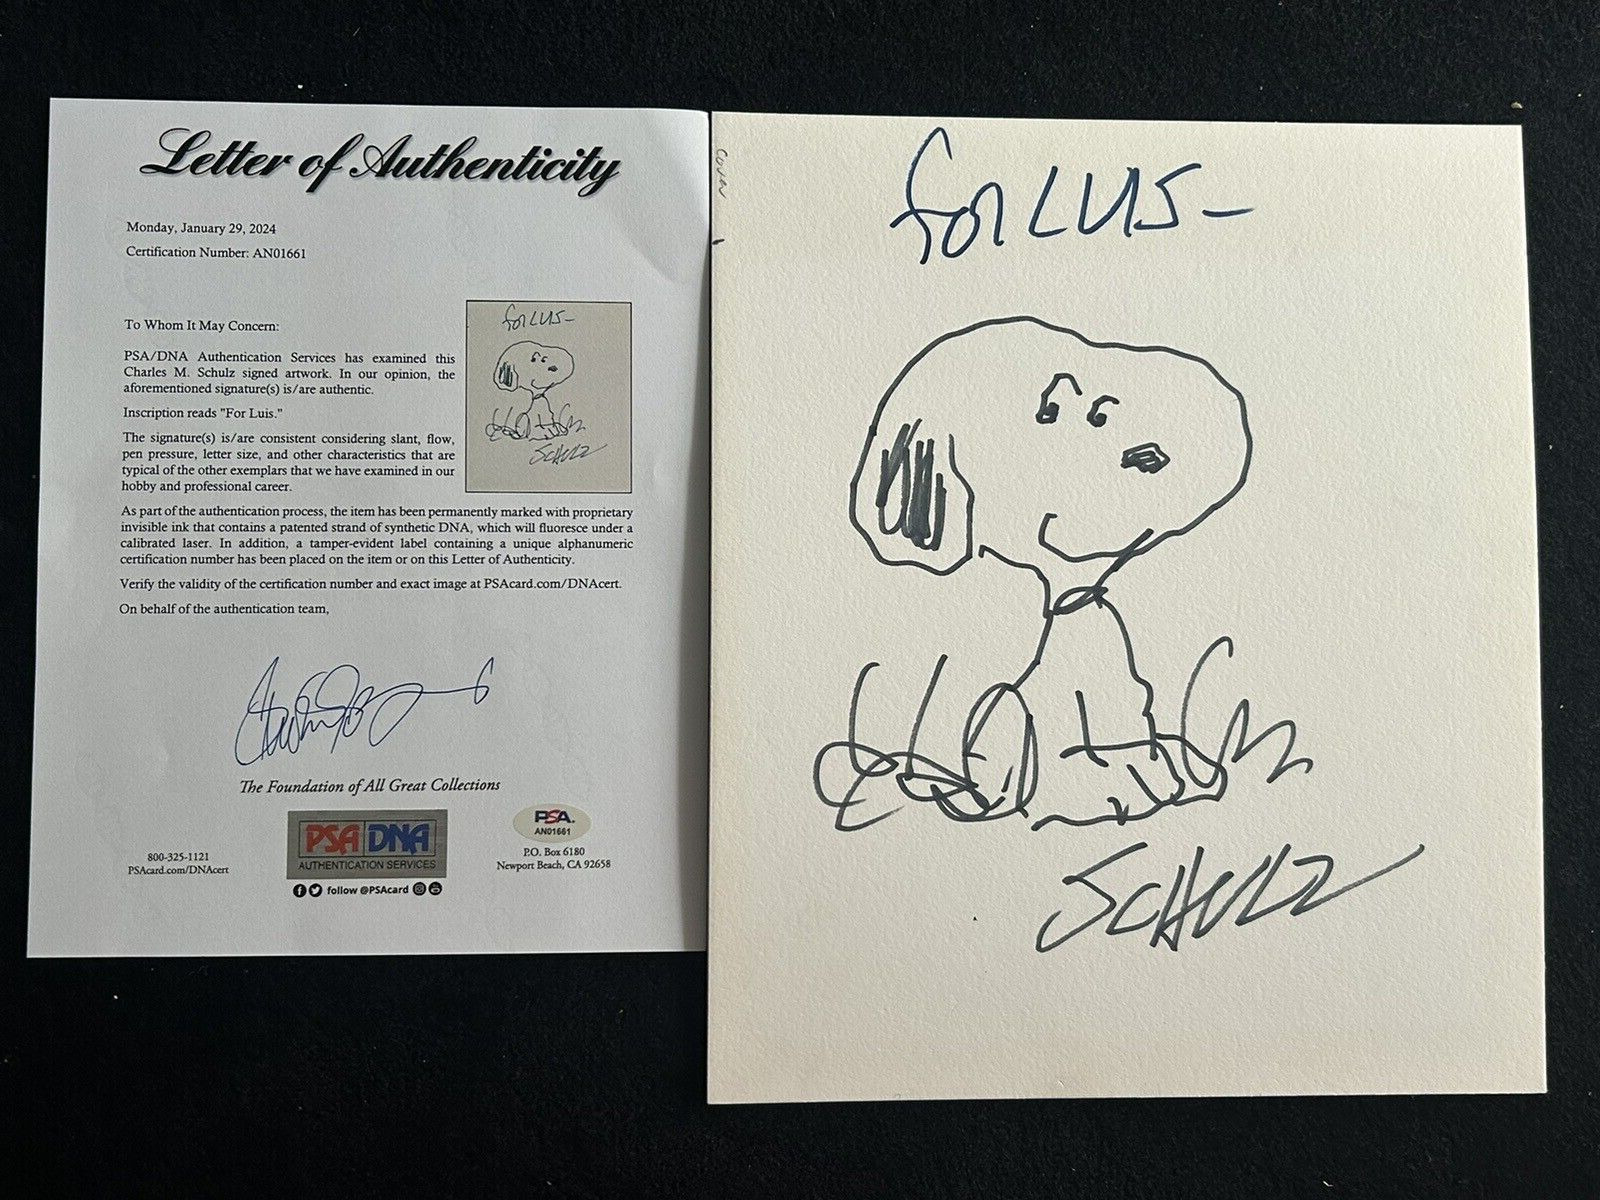 1998 Charles M. Schulz Hand Signed Snoopy Sketch 11x13 Autographed PSA Full LOA